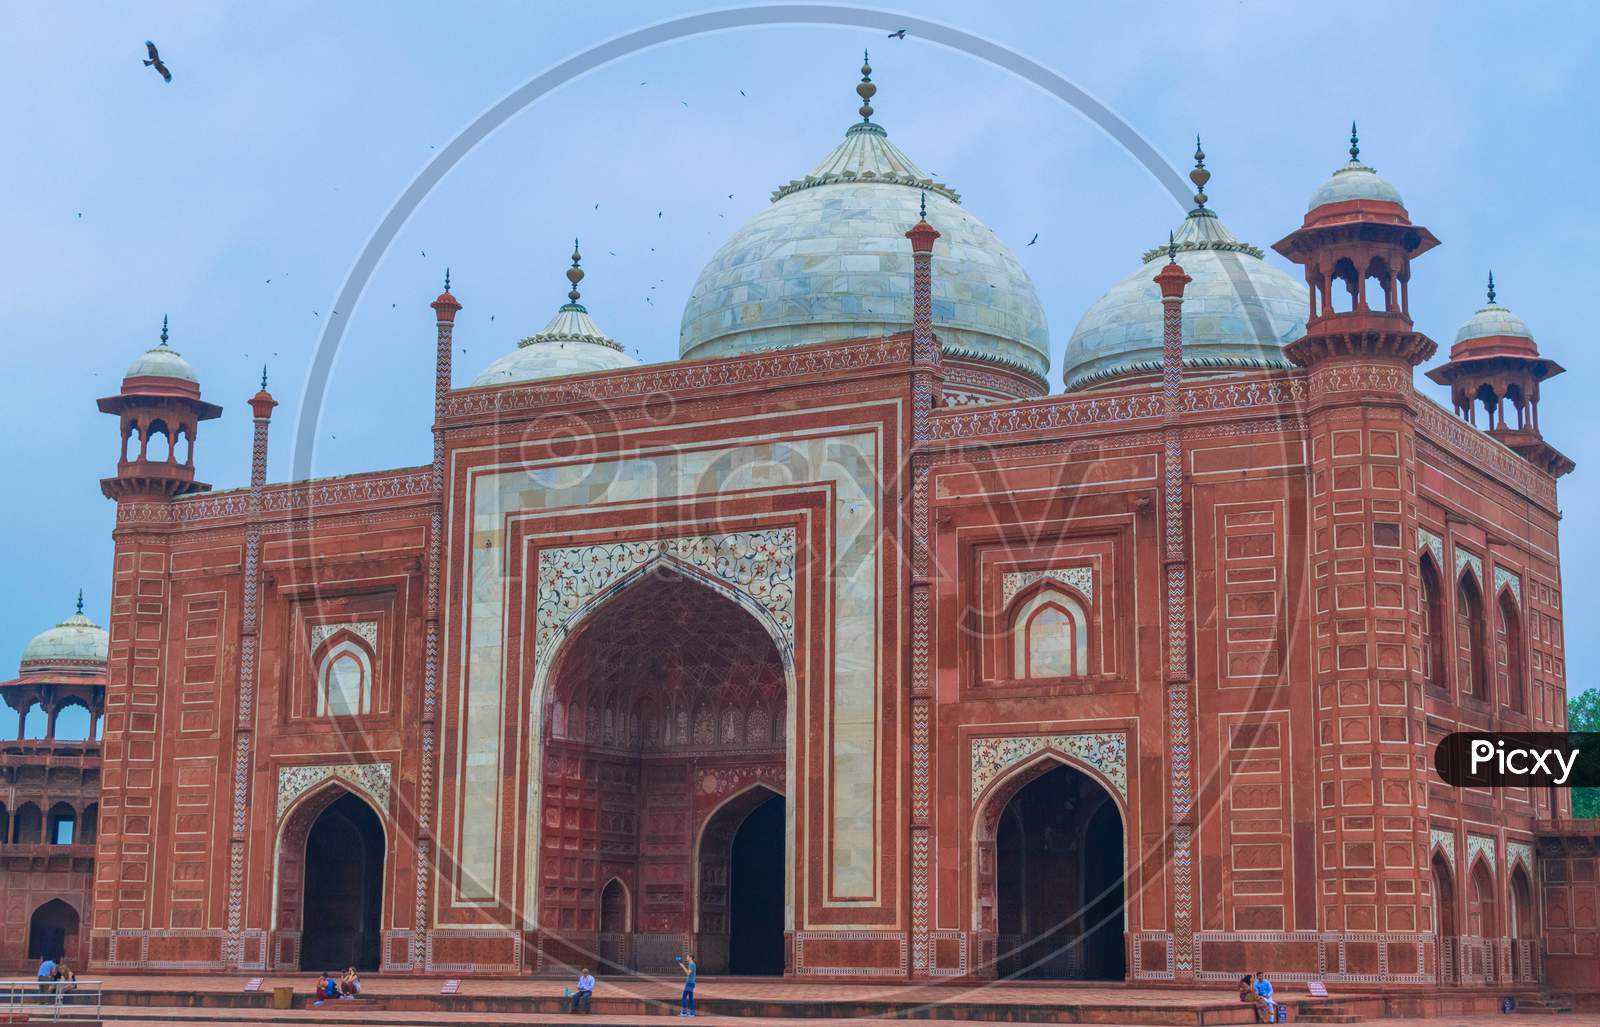 Architecture Of  Gate Way For Taj Mahal in Agra